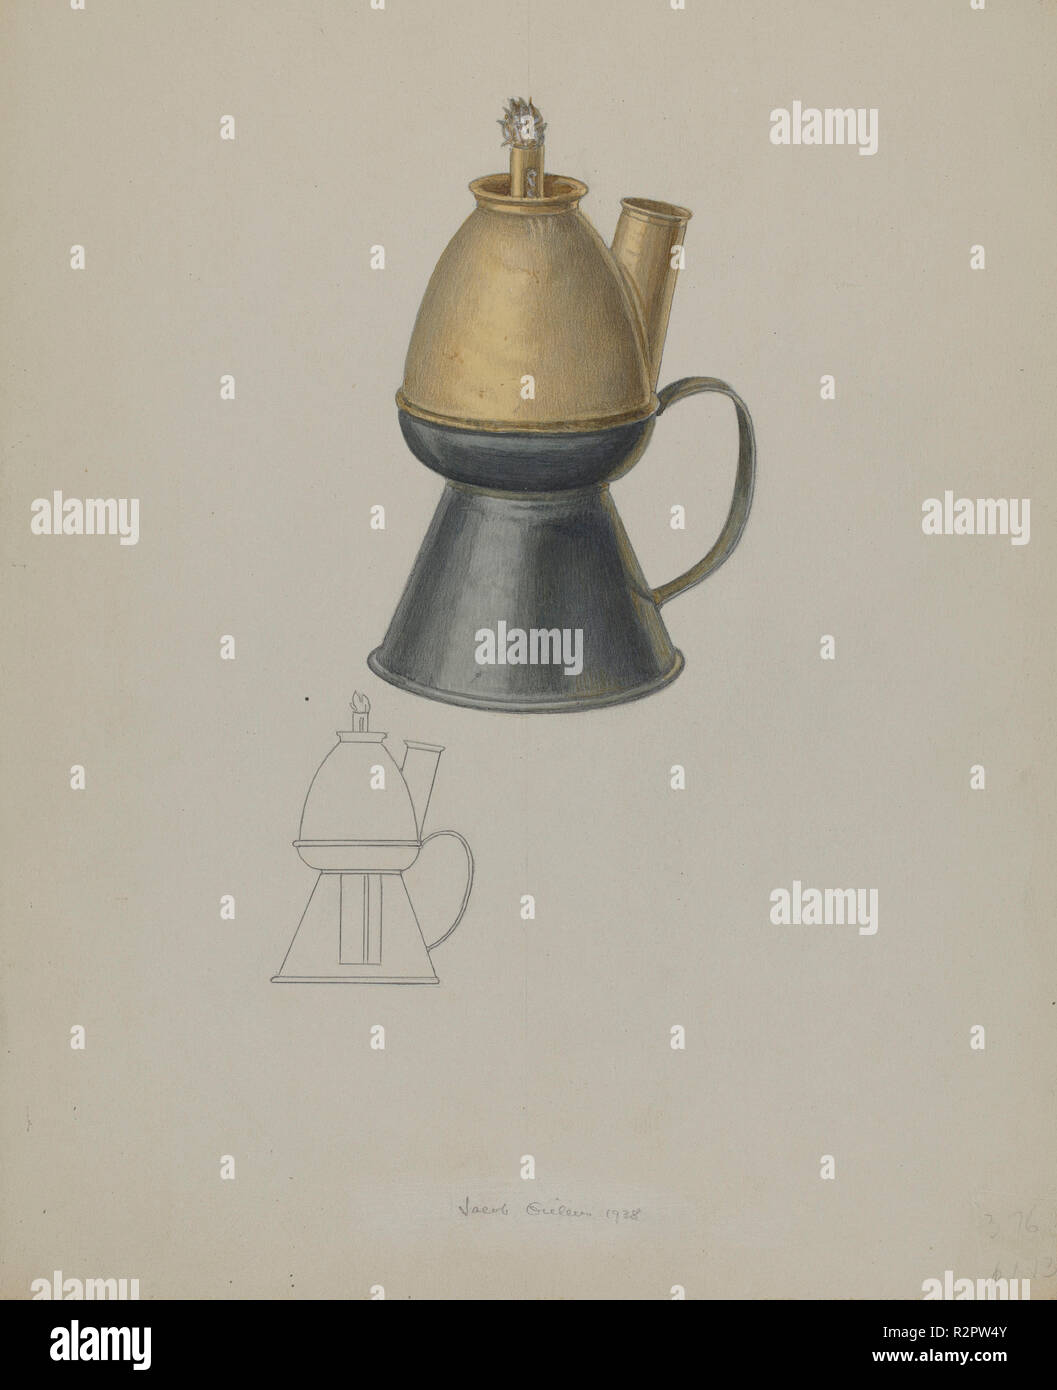 Petticoat Lamp. Dated: 1938. Dimensions: overall: 27.9 x 22.9 cm (11 x 9 in.). Medium: watercolor and graphite on paperboard. Museum: National Gallery of Art, Washington DC. Author: Jacob Gielens. Stock Photo